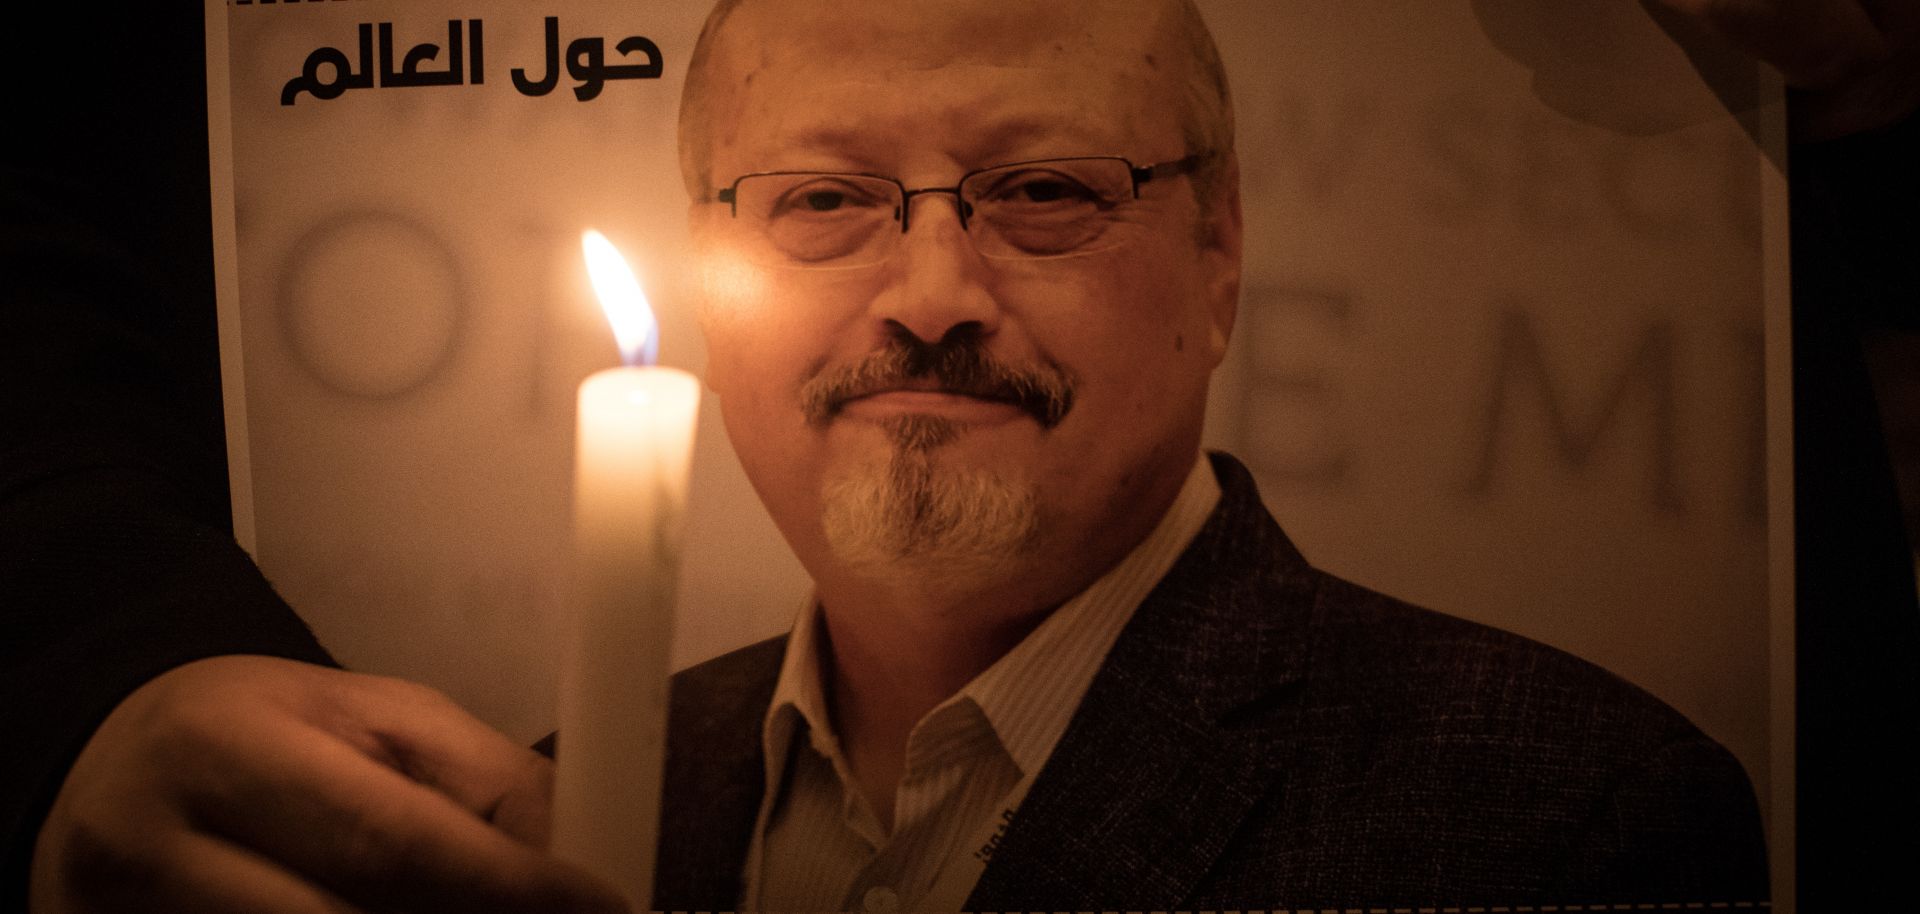 People take part in a candlelight vigil to remember journalist Jamal Khashoggi outside the Saudi consulate in Istanbul on Oct. 25, 2018.